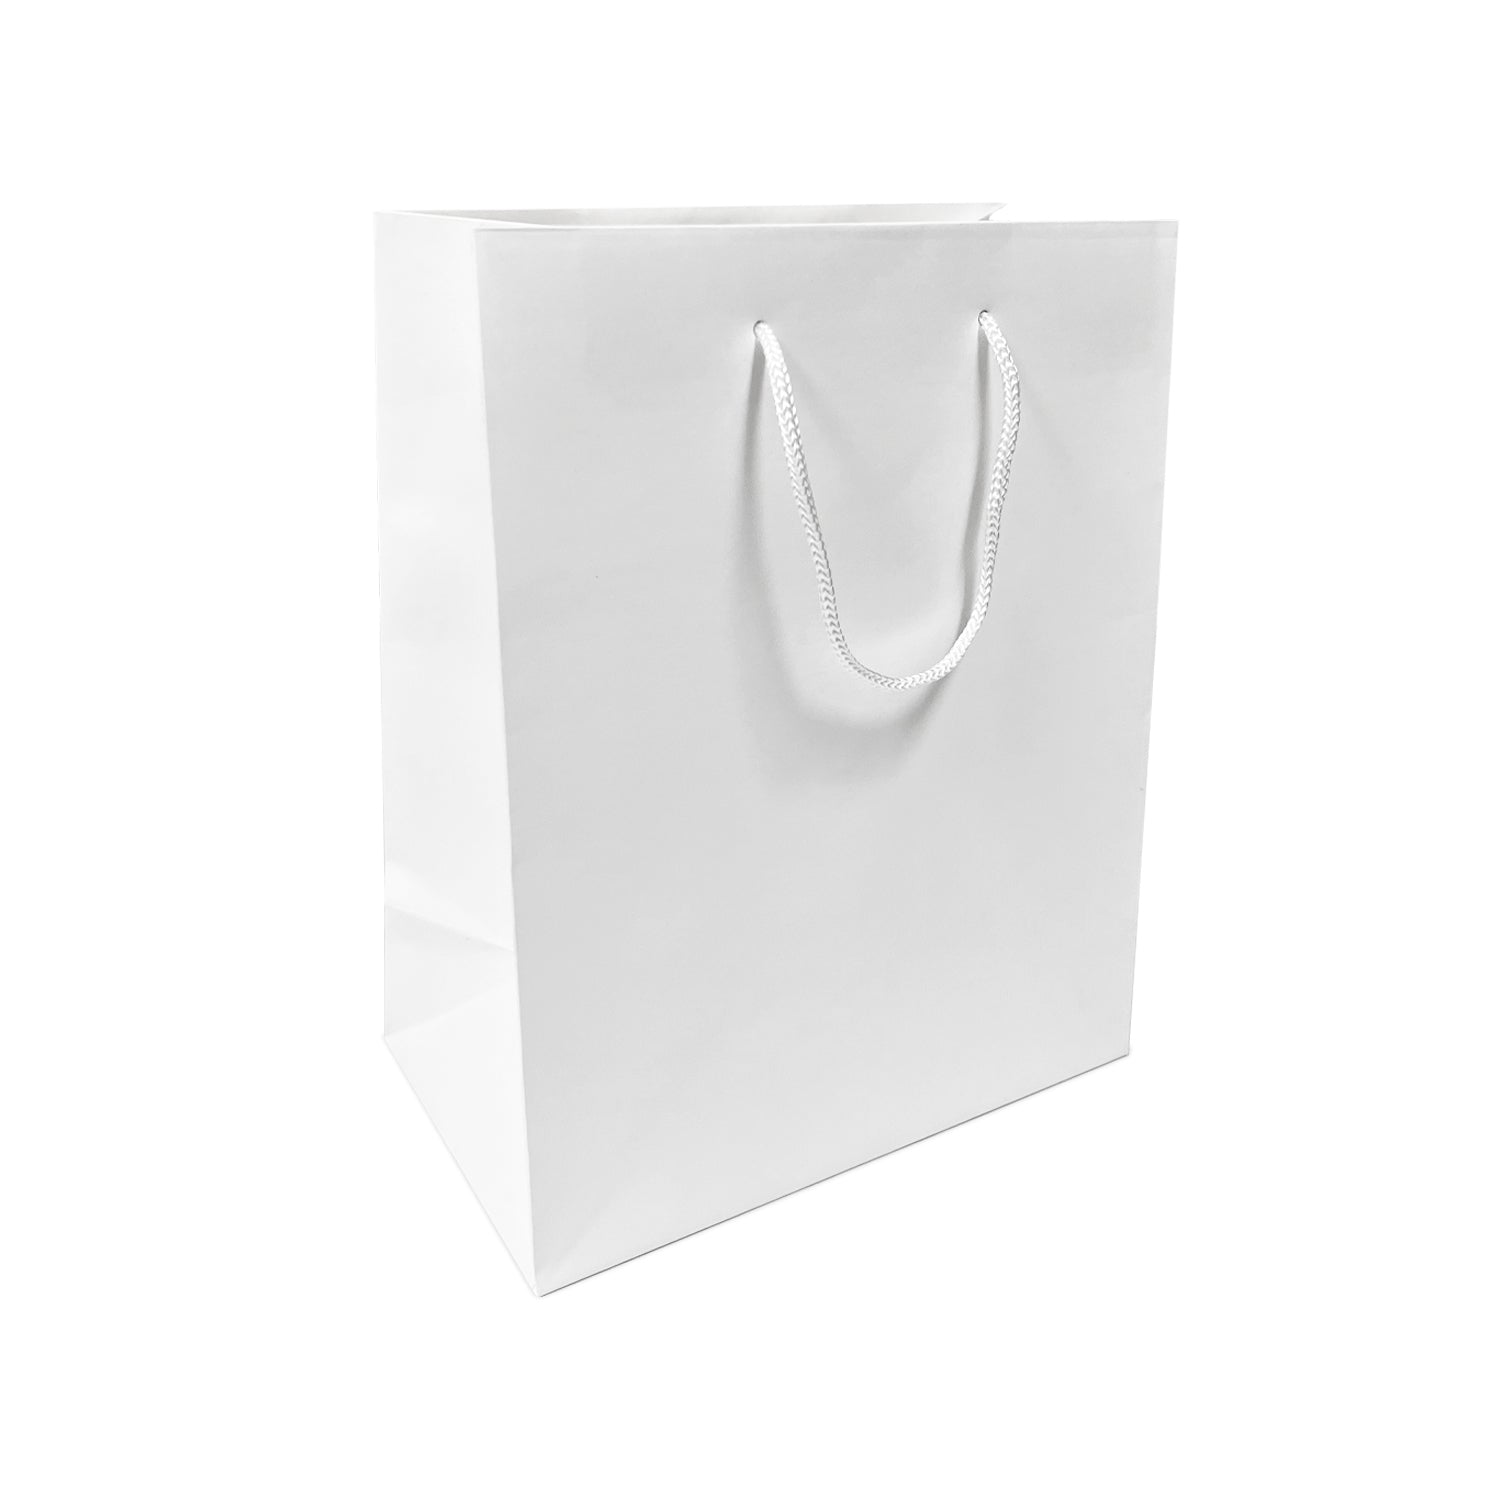 150 Pcs, Cub,  8x4.75x10.25 inches, White Euro Tote Paper Bags, with Rope Handle